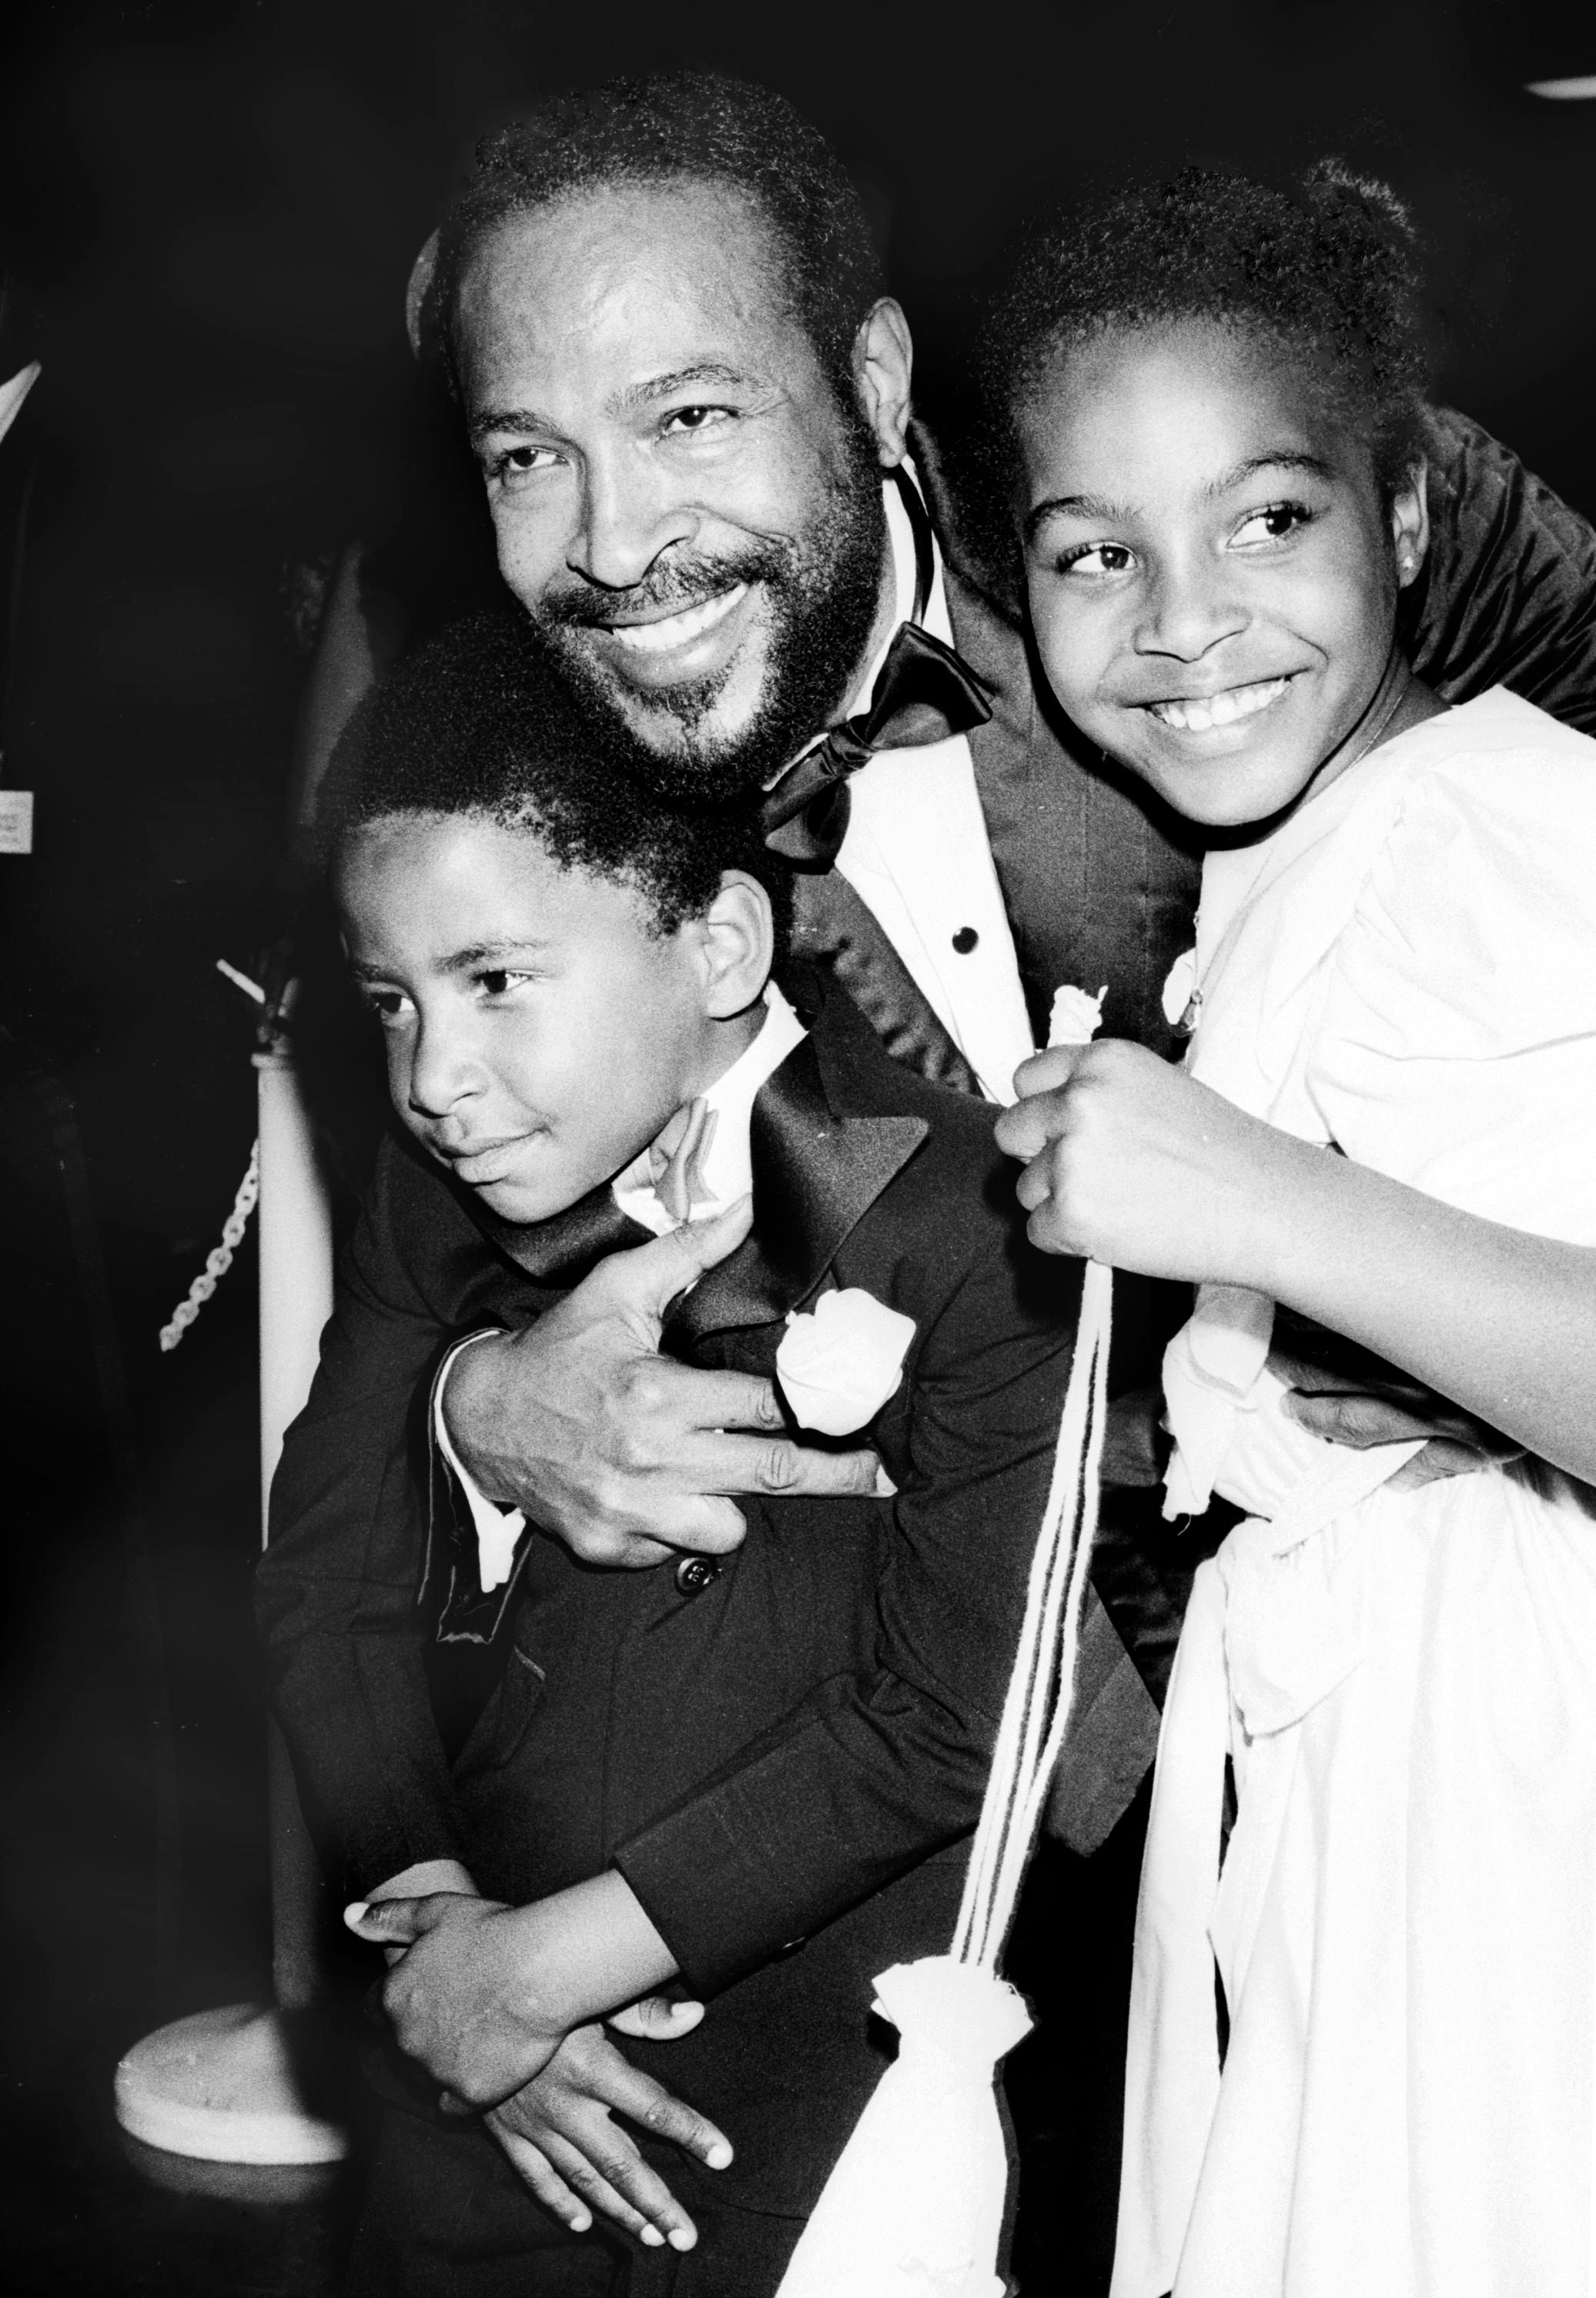 Soul singer Marvin Gaye hugs his children, Nona Gaye and Frankie Chirstian Gaye at an event in circa 1981 | Photo: Getty Images